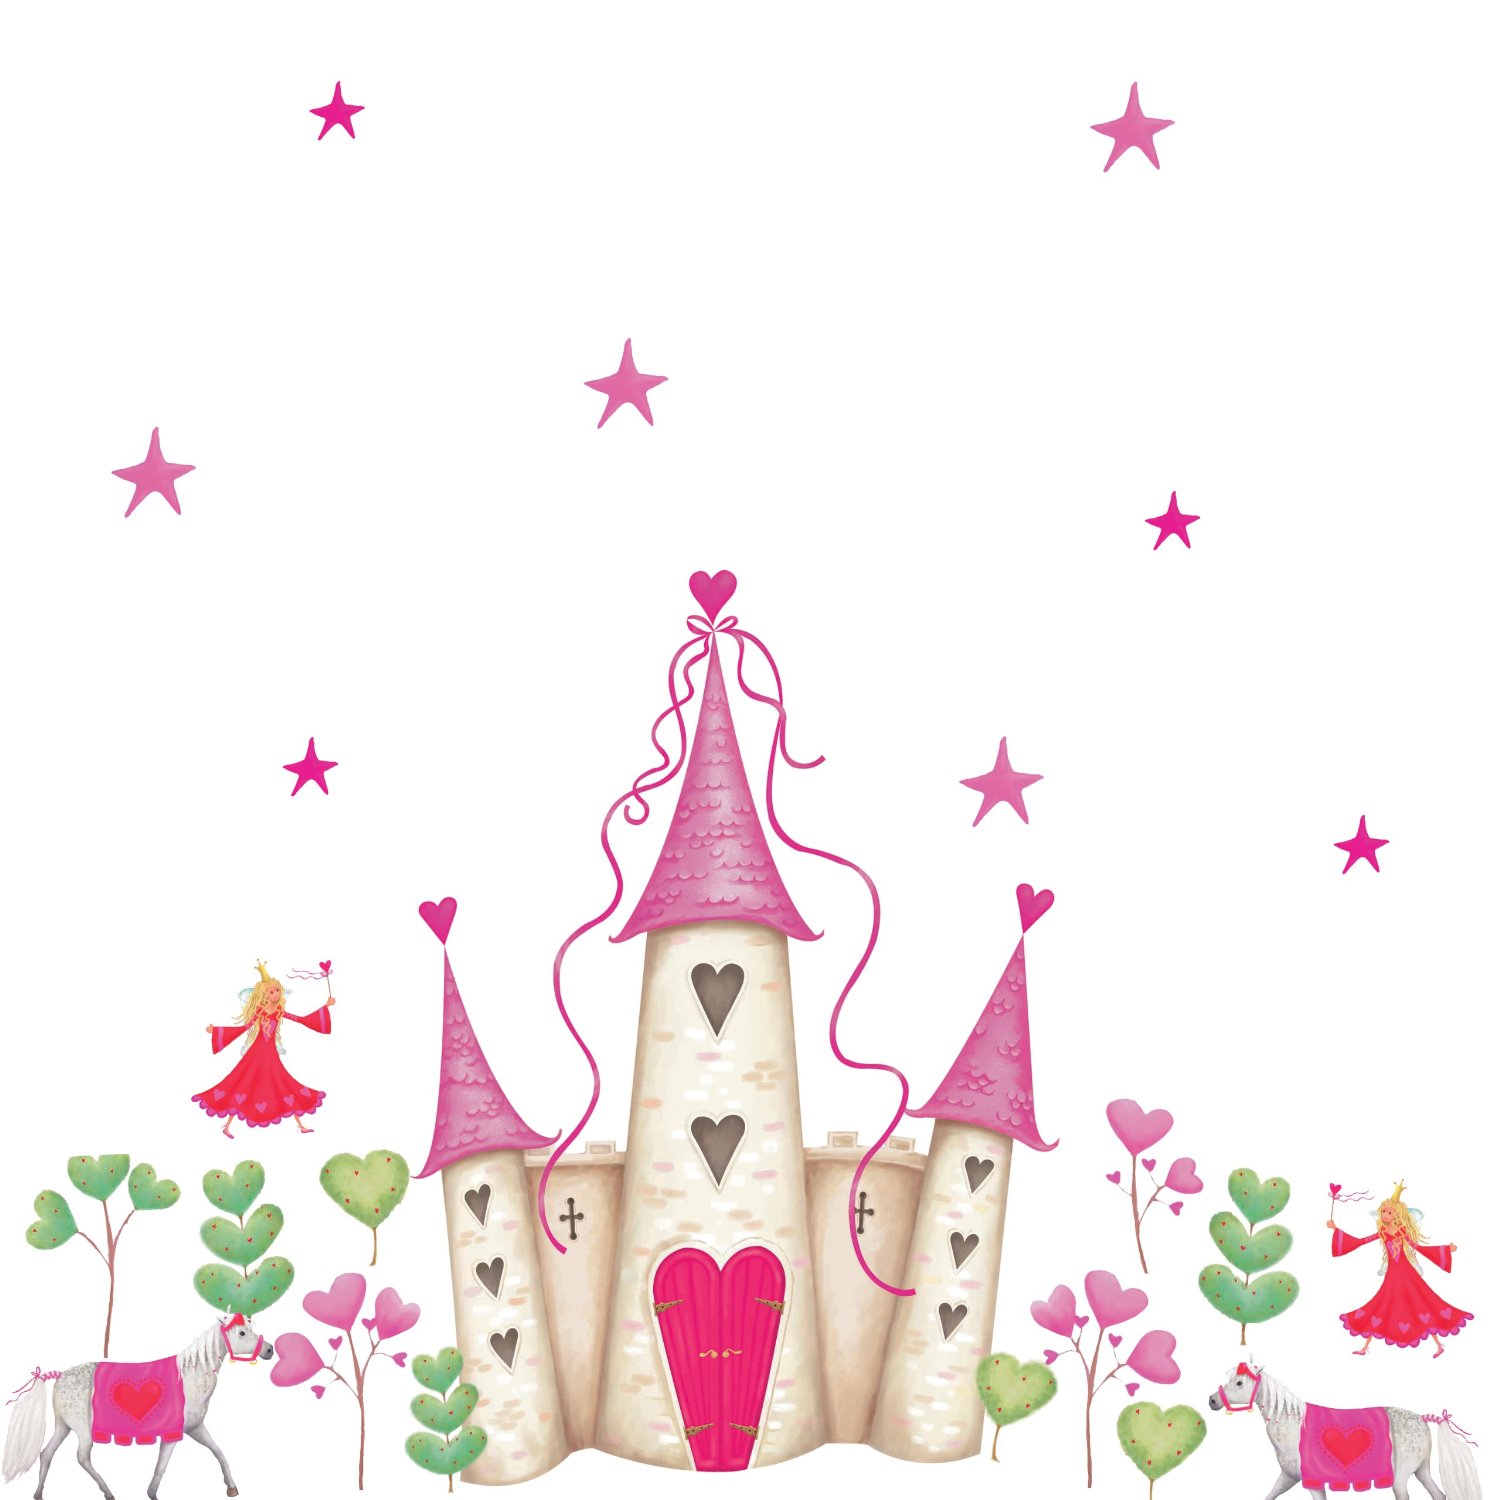 Princess Castle Background Wallpaper Images Pictures   Becuo